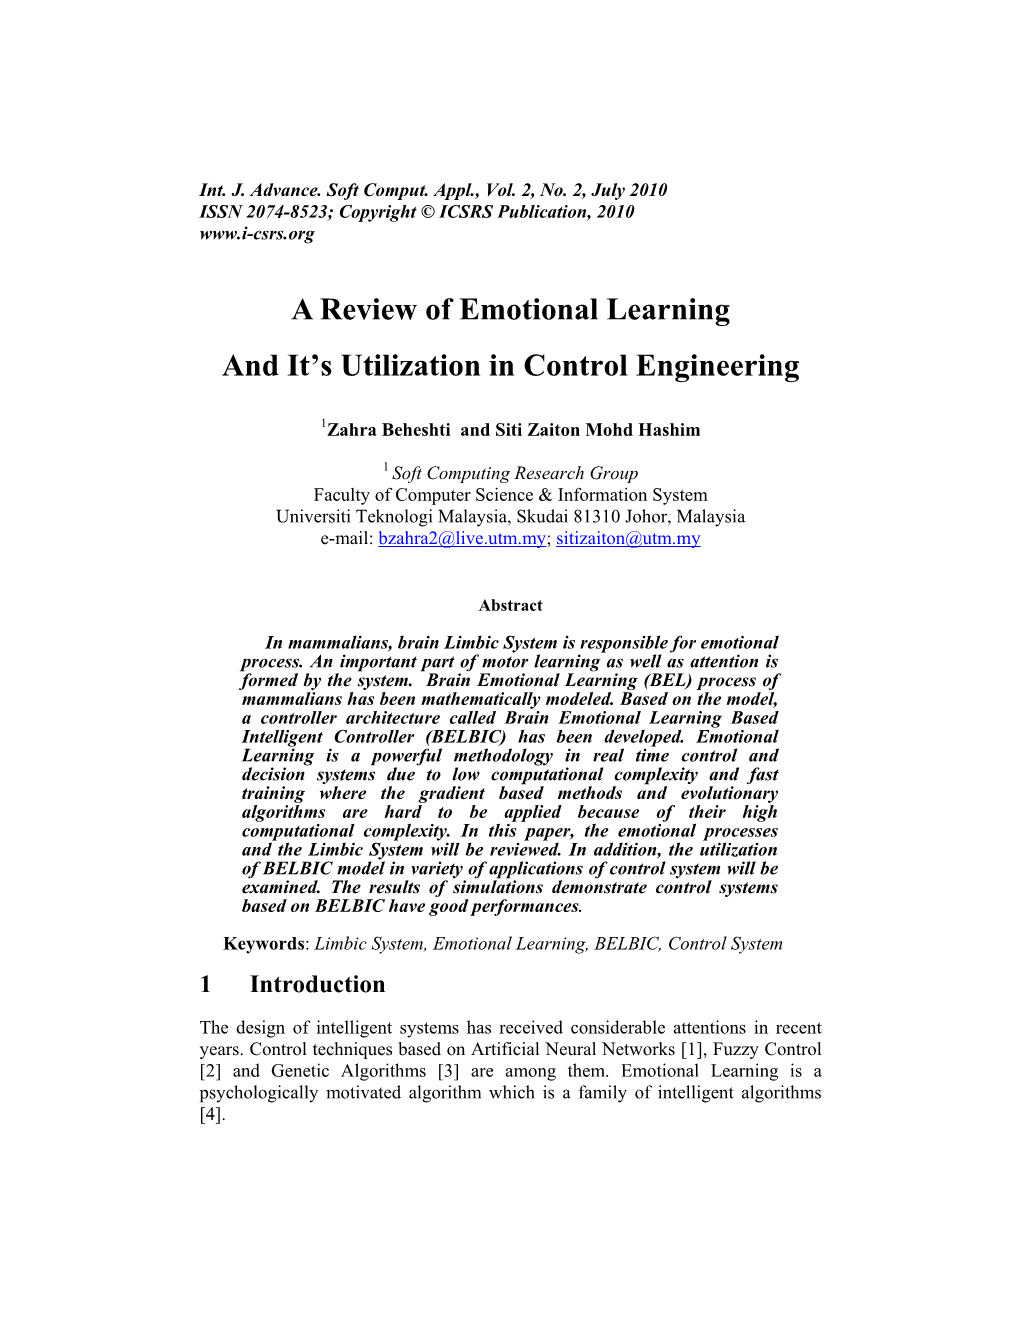 A Review of Emotional Learning and It's Utilization in Control Engineering